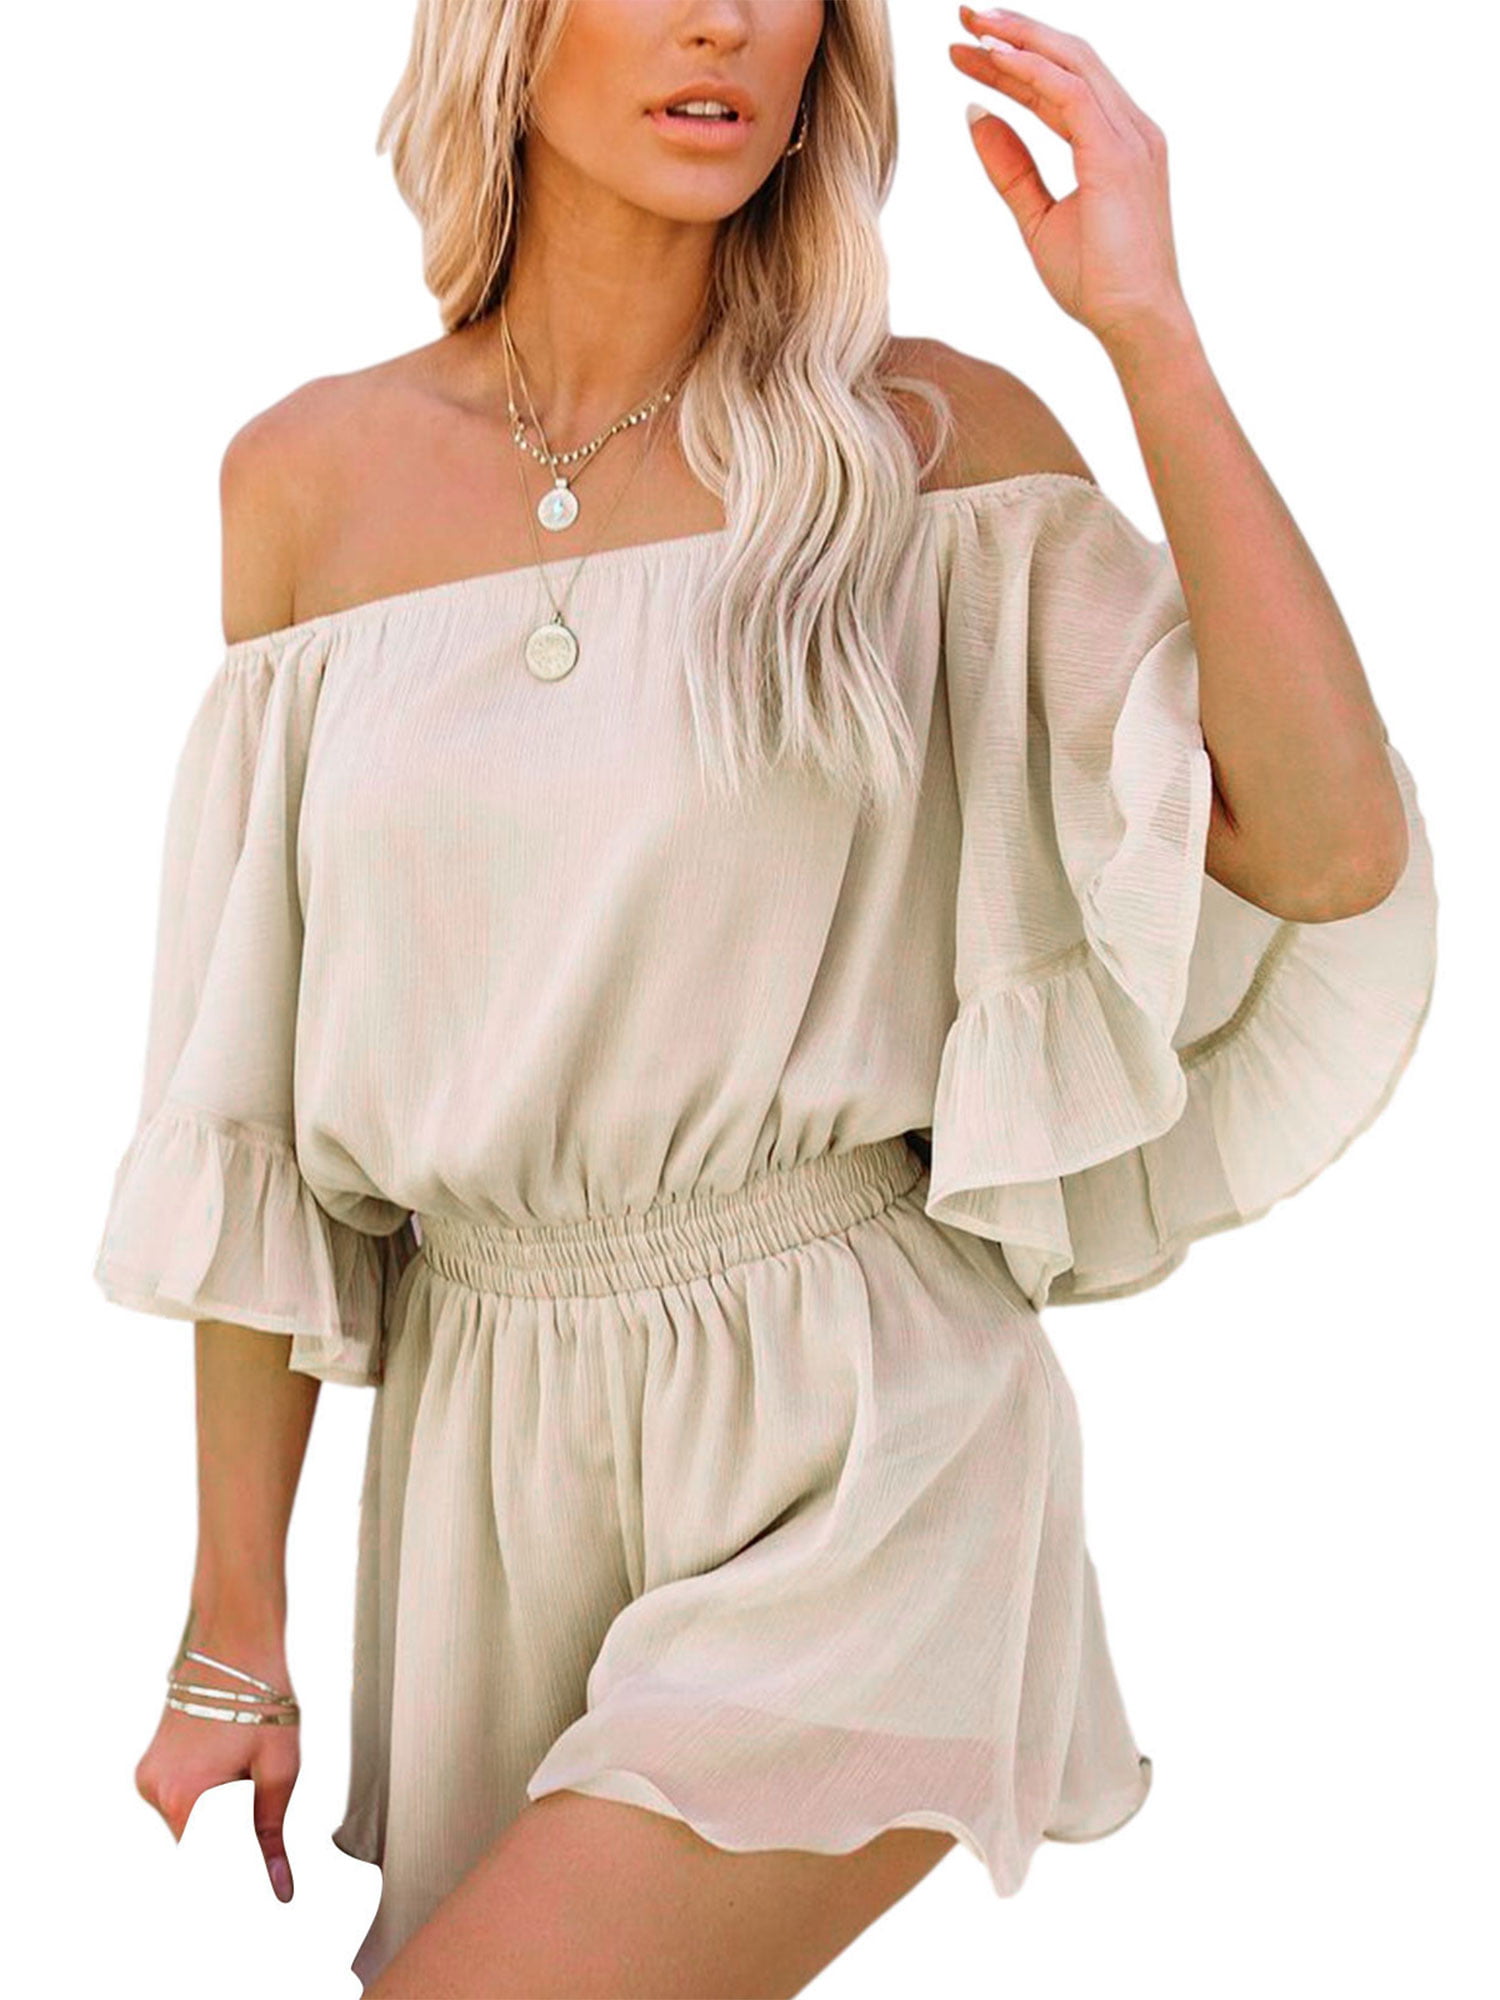 Women Ruffle Short Sleeve Cold Shoulder Jumpsuit Casual Summer Playsuits Rompers 